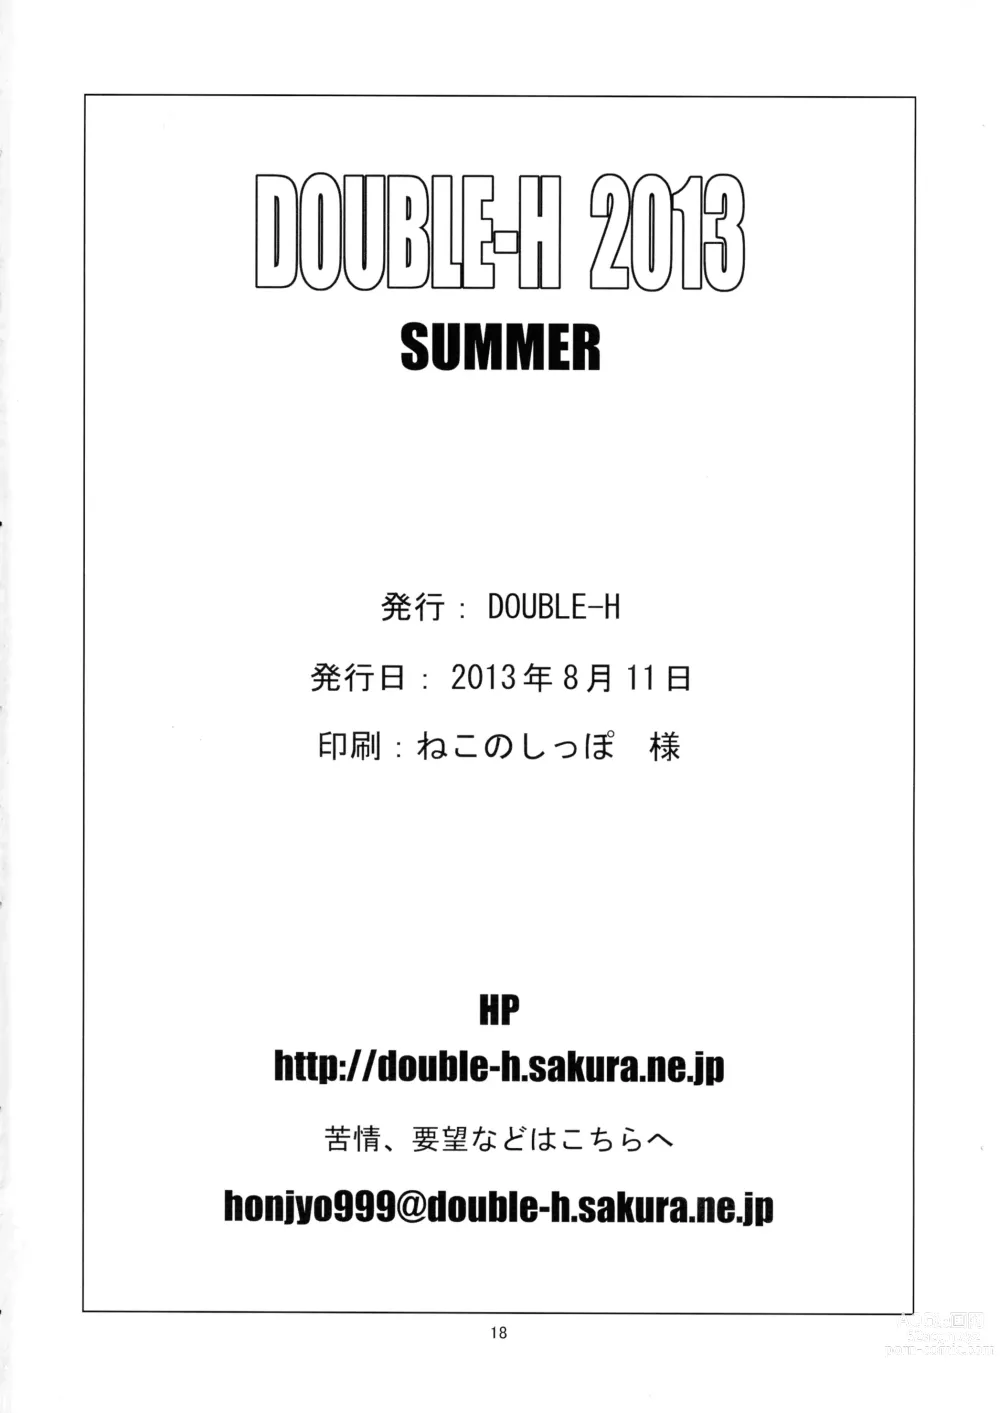 Page 18 of doujinshi DOUBLE-H 2013 SUMMER